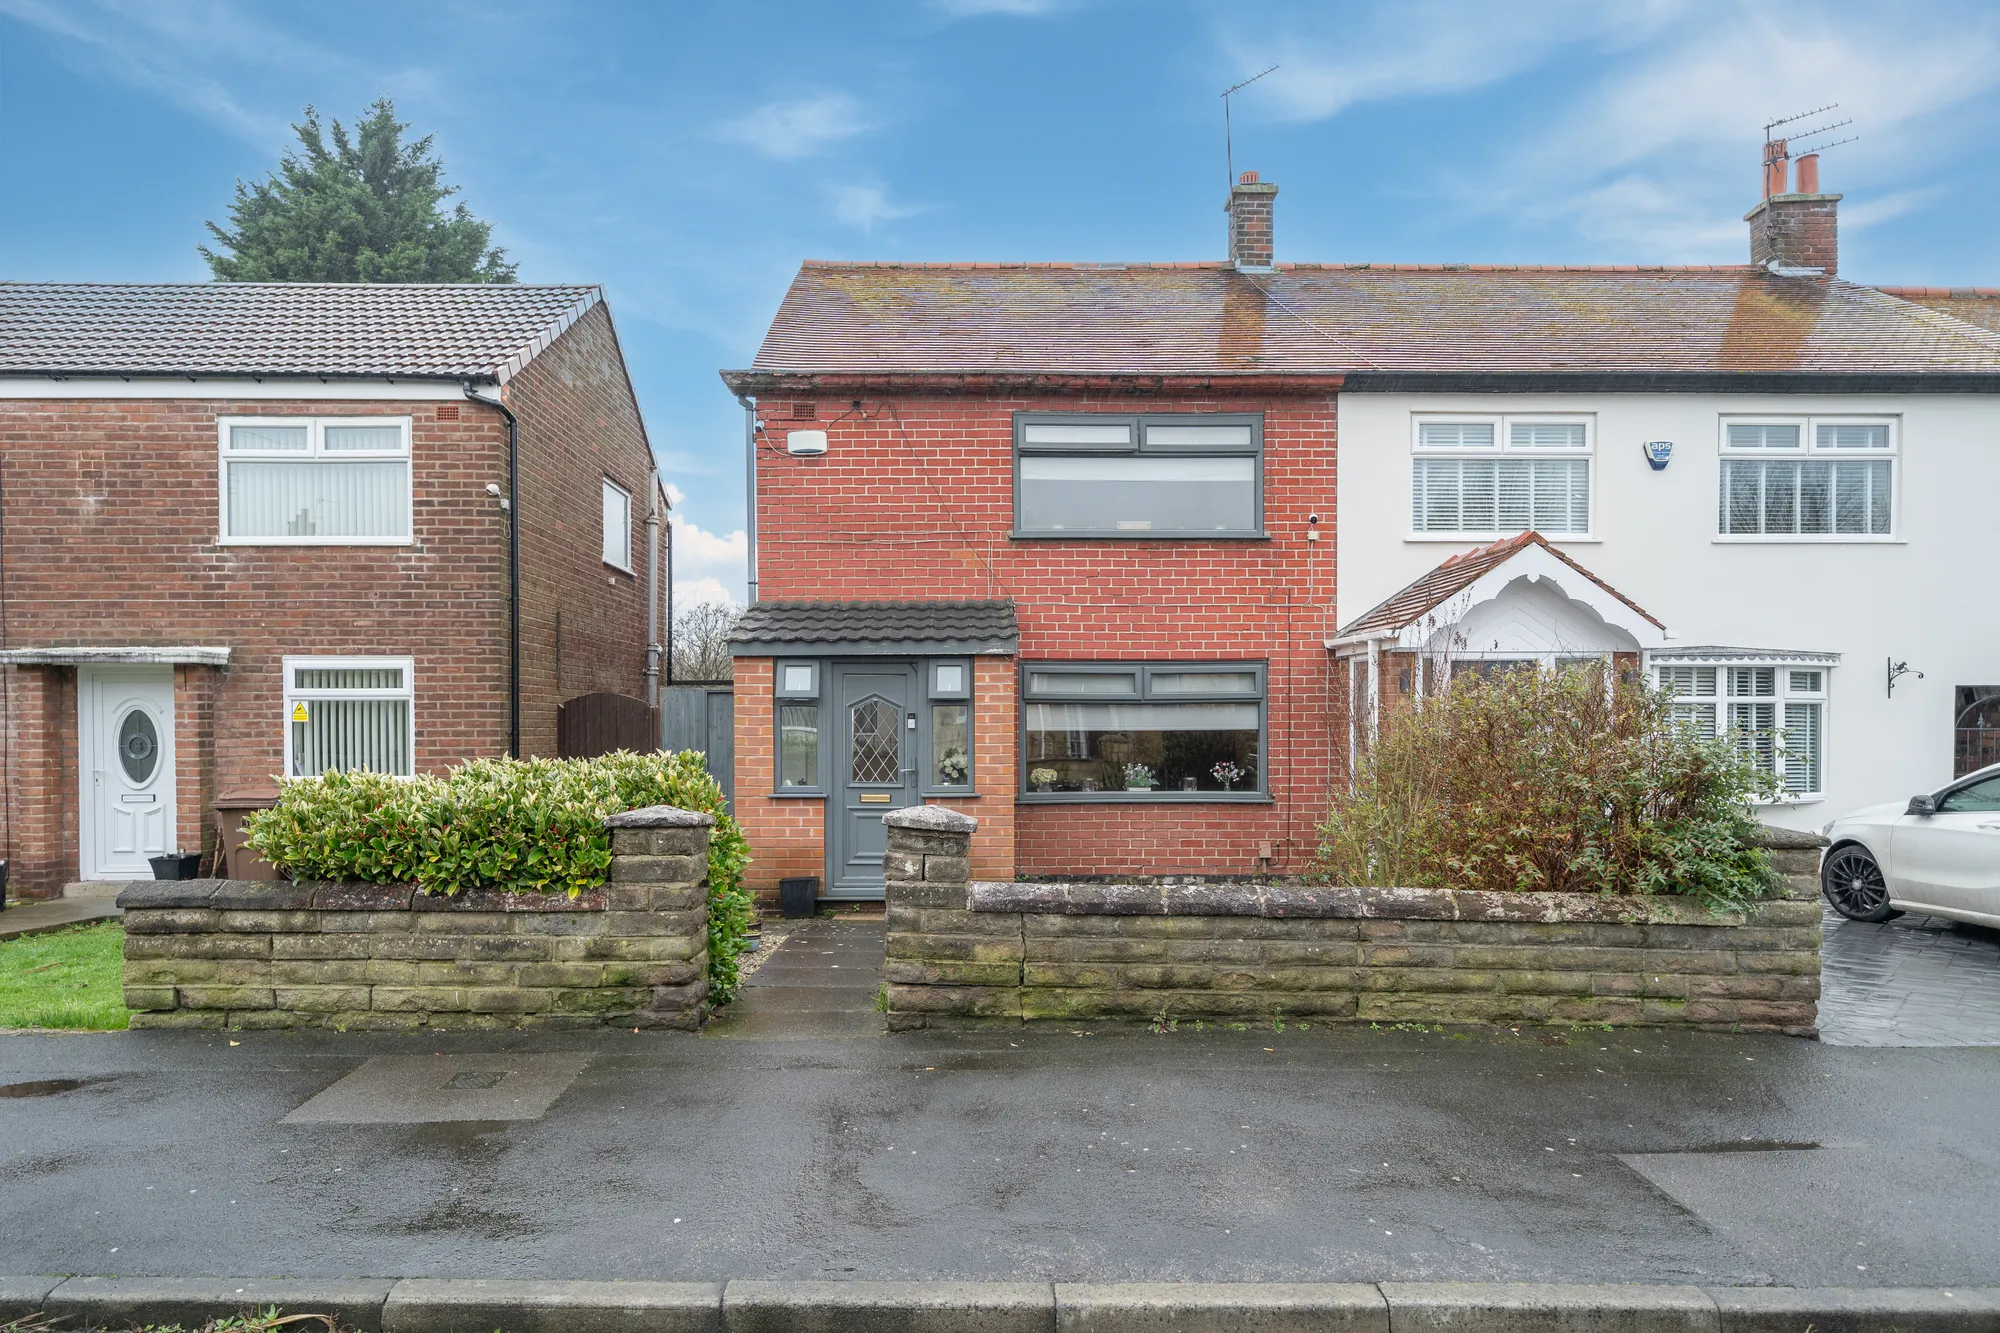 Stunning 2 Bed End of Terrace house in canal side location. Beautiful living space, open-plan kitchen diner with bi-fold doors to garden. 2 double bedrooms, modern bathroom. Enchanting outside space with decking, lawn, and patio areas - perfect for al fresco dining.